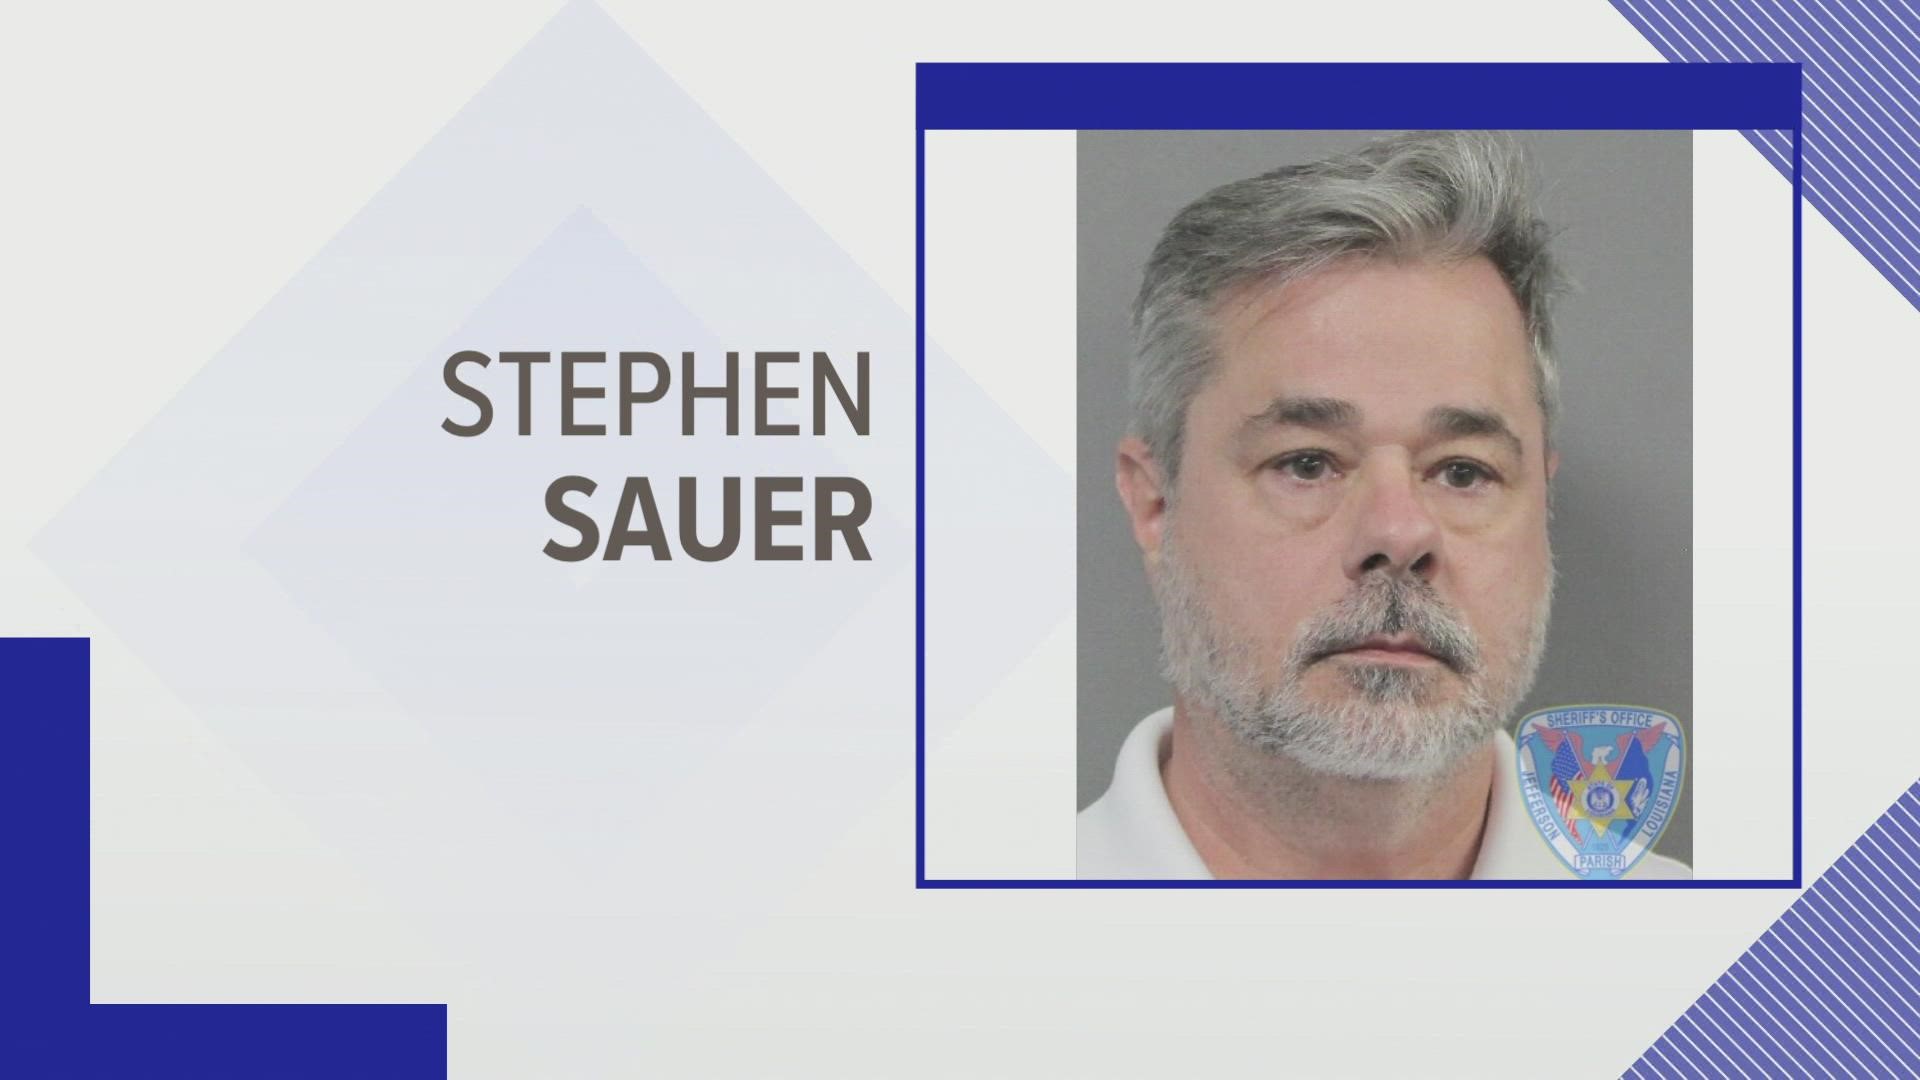 Former head of group that aids mentally disabled arrested on video voyeurism, sex battery counts wwltv